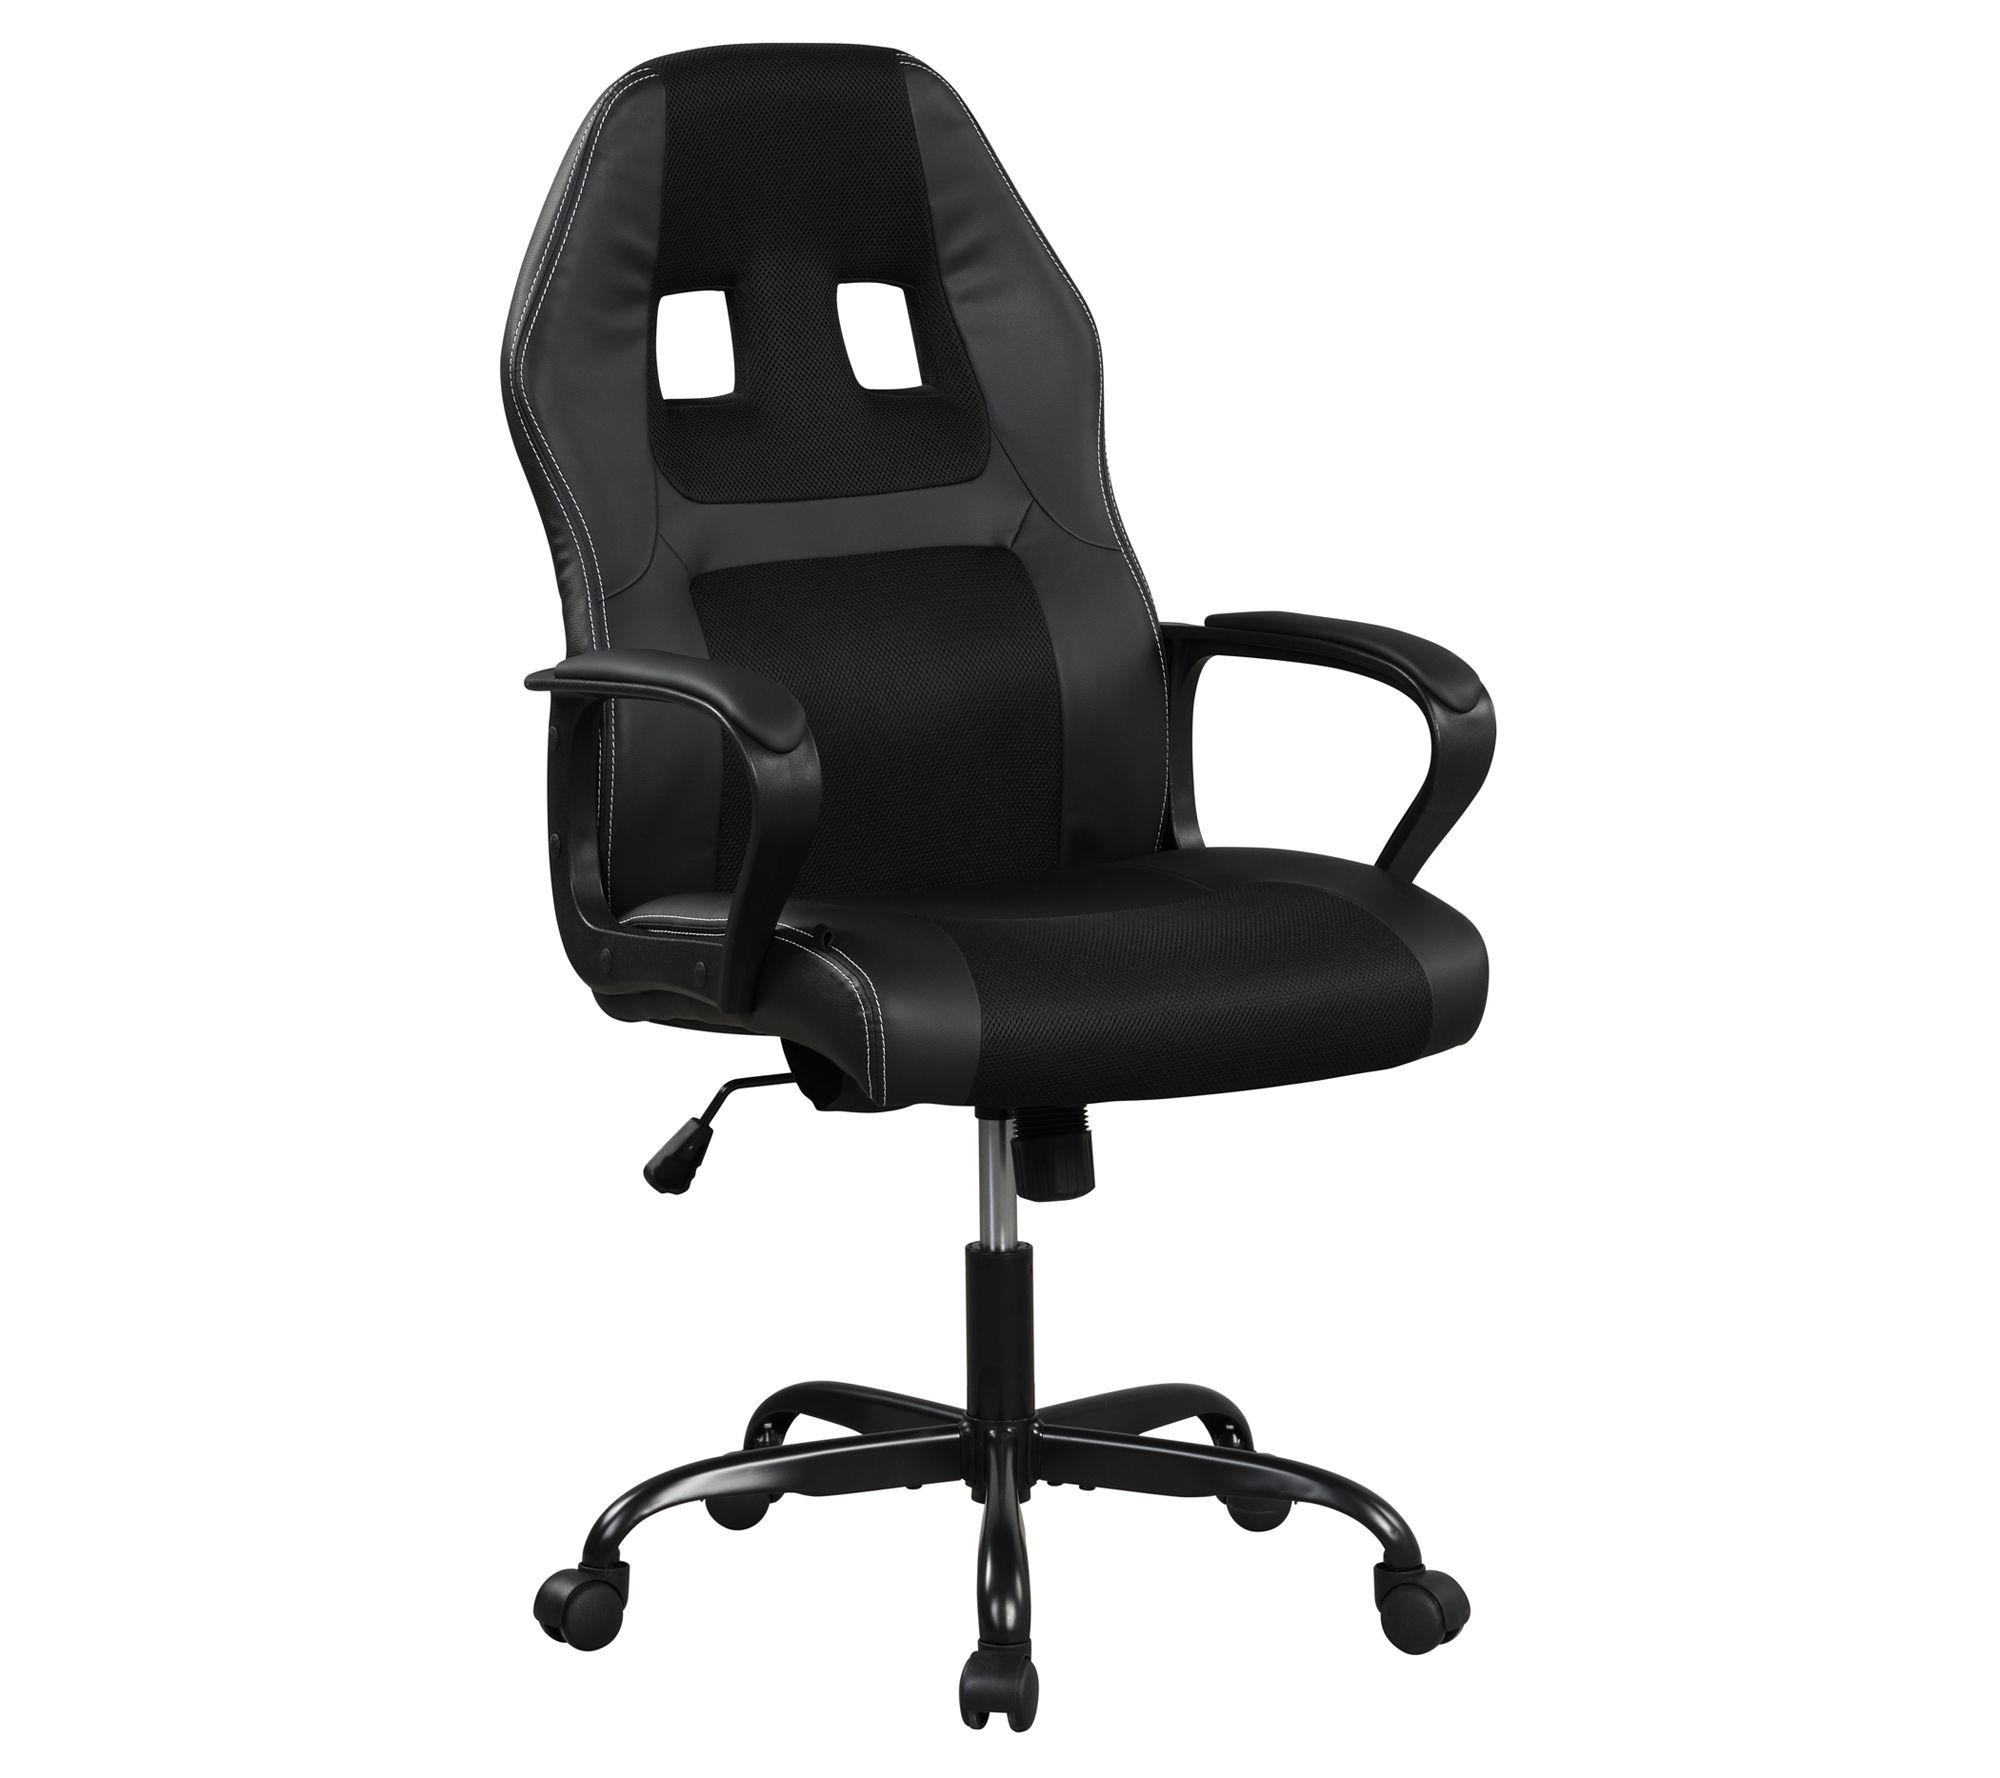 Lifestyle Solutions Hartley Massage Gaming Chair - QVC.com